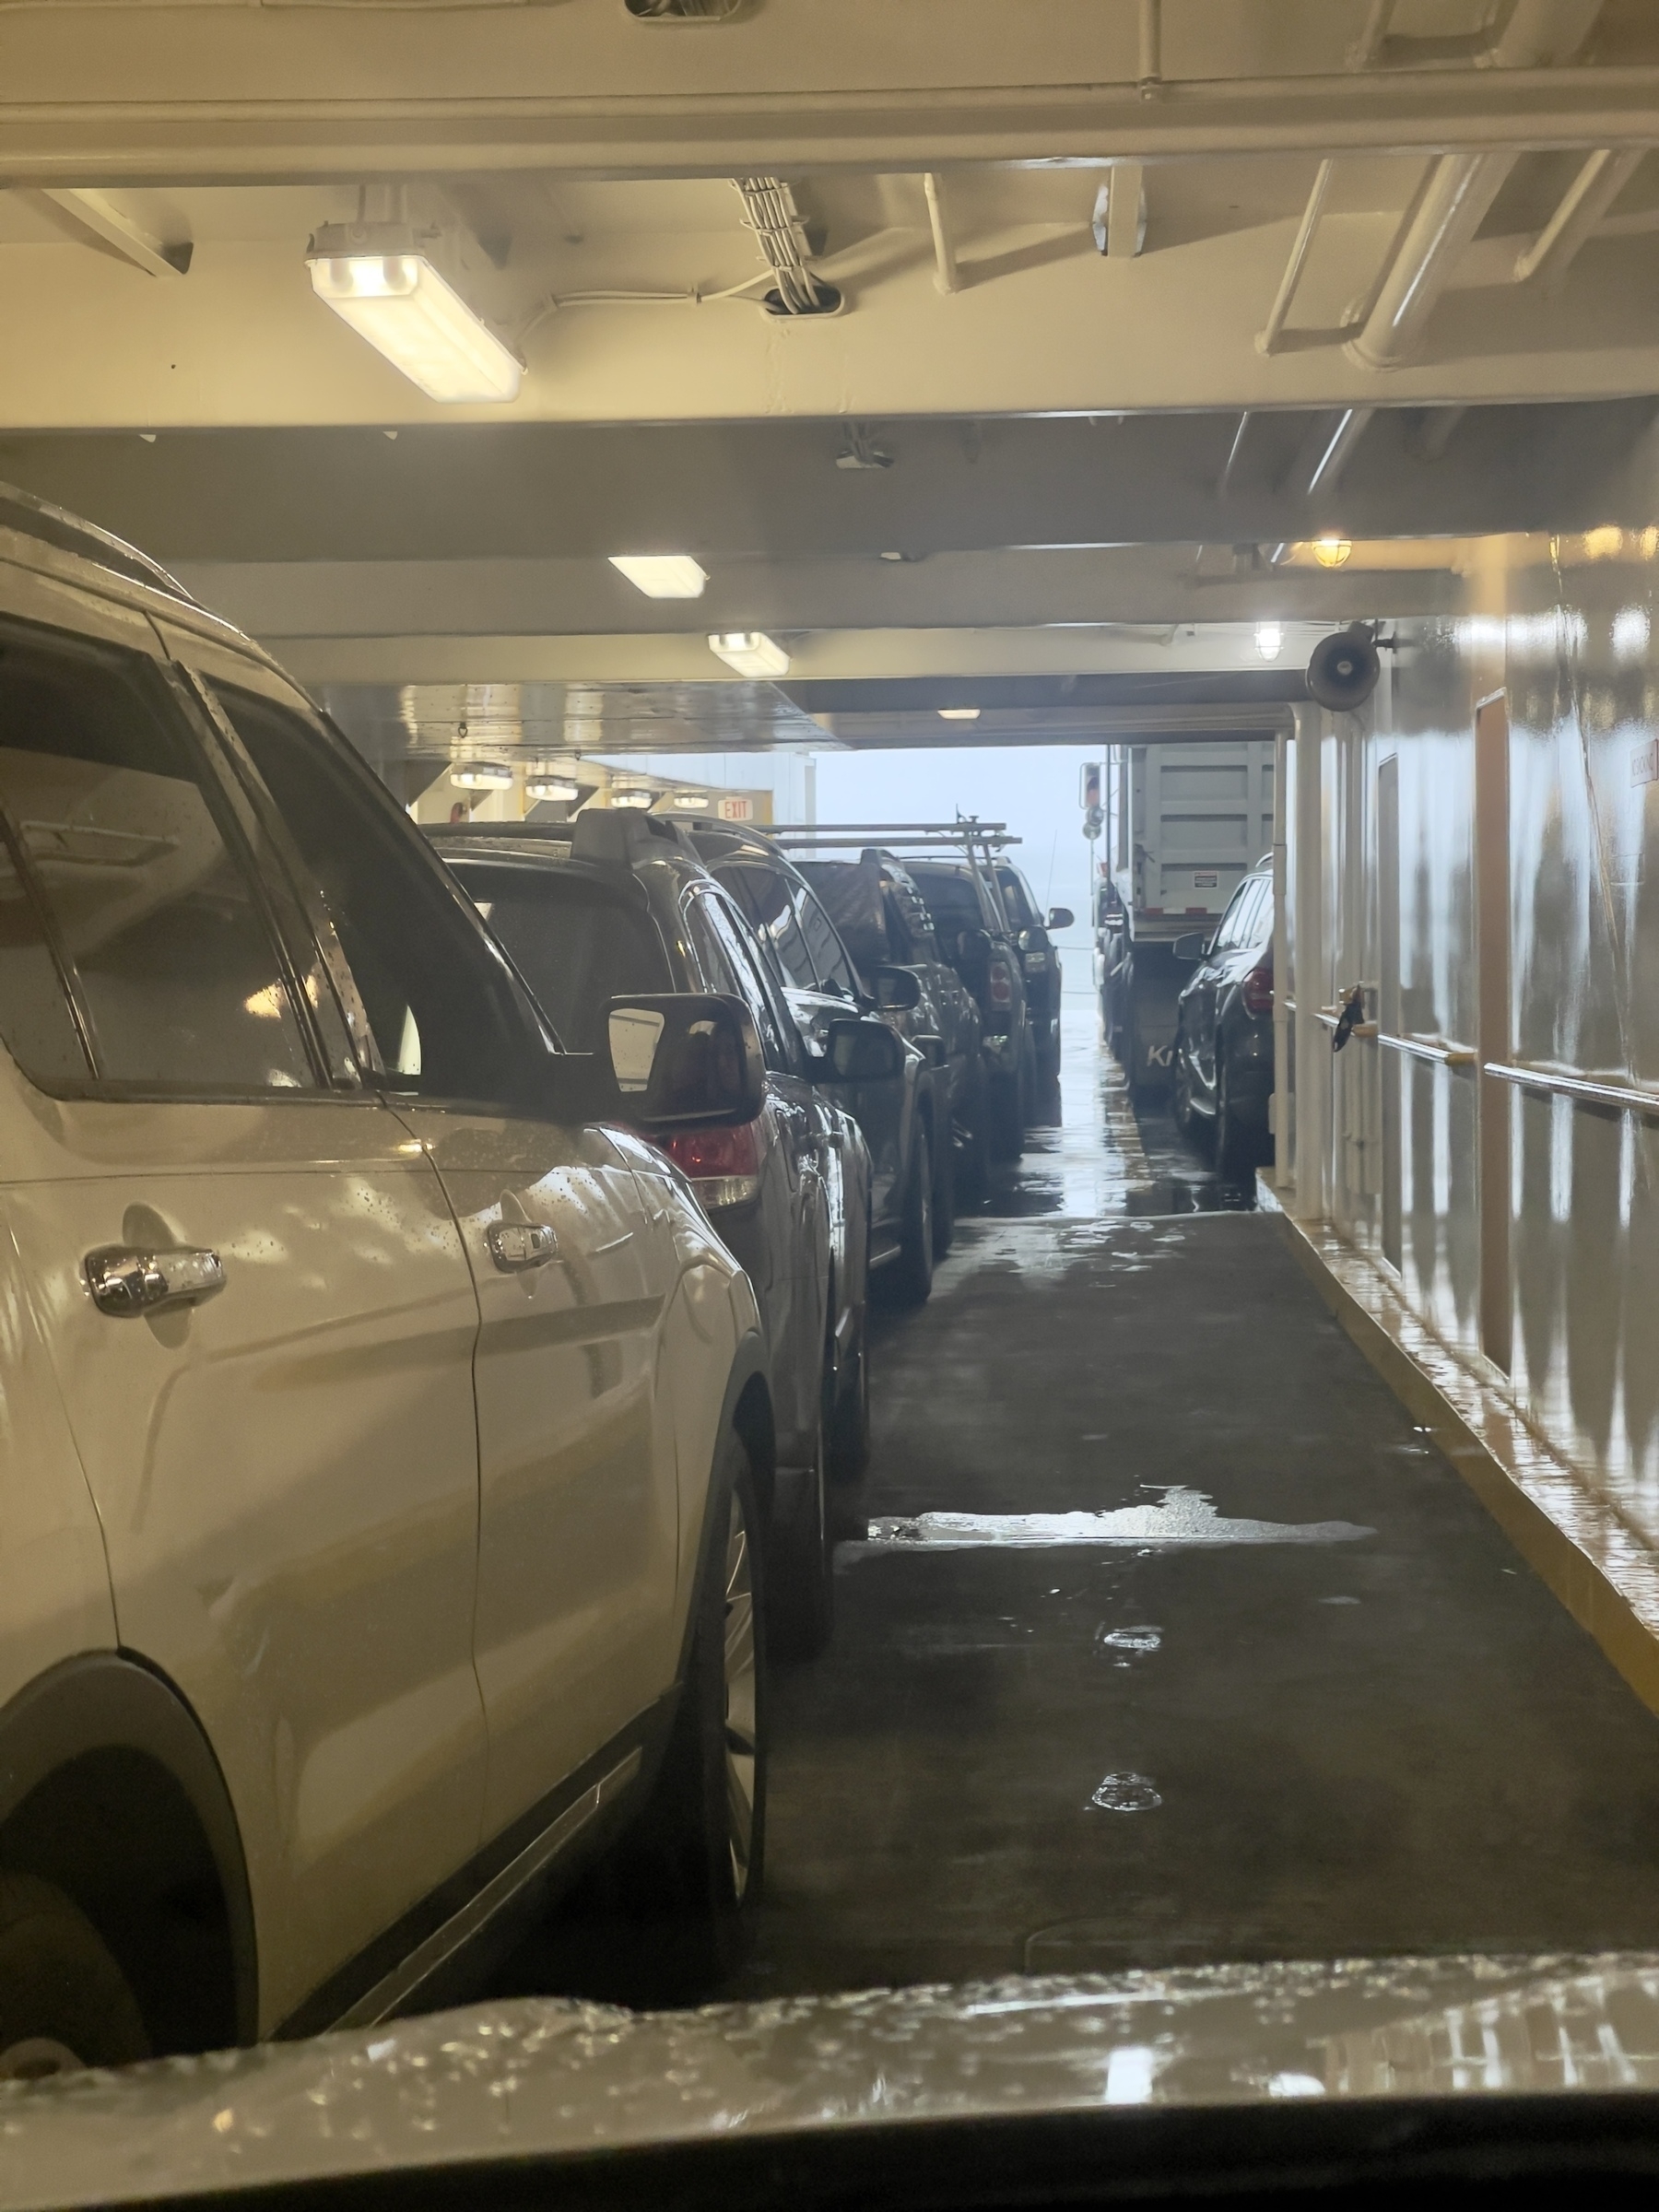 Line of cars on a ferry.